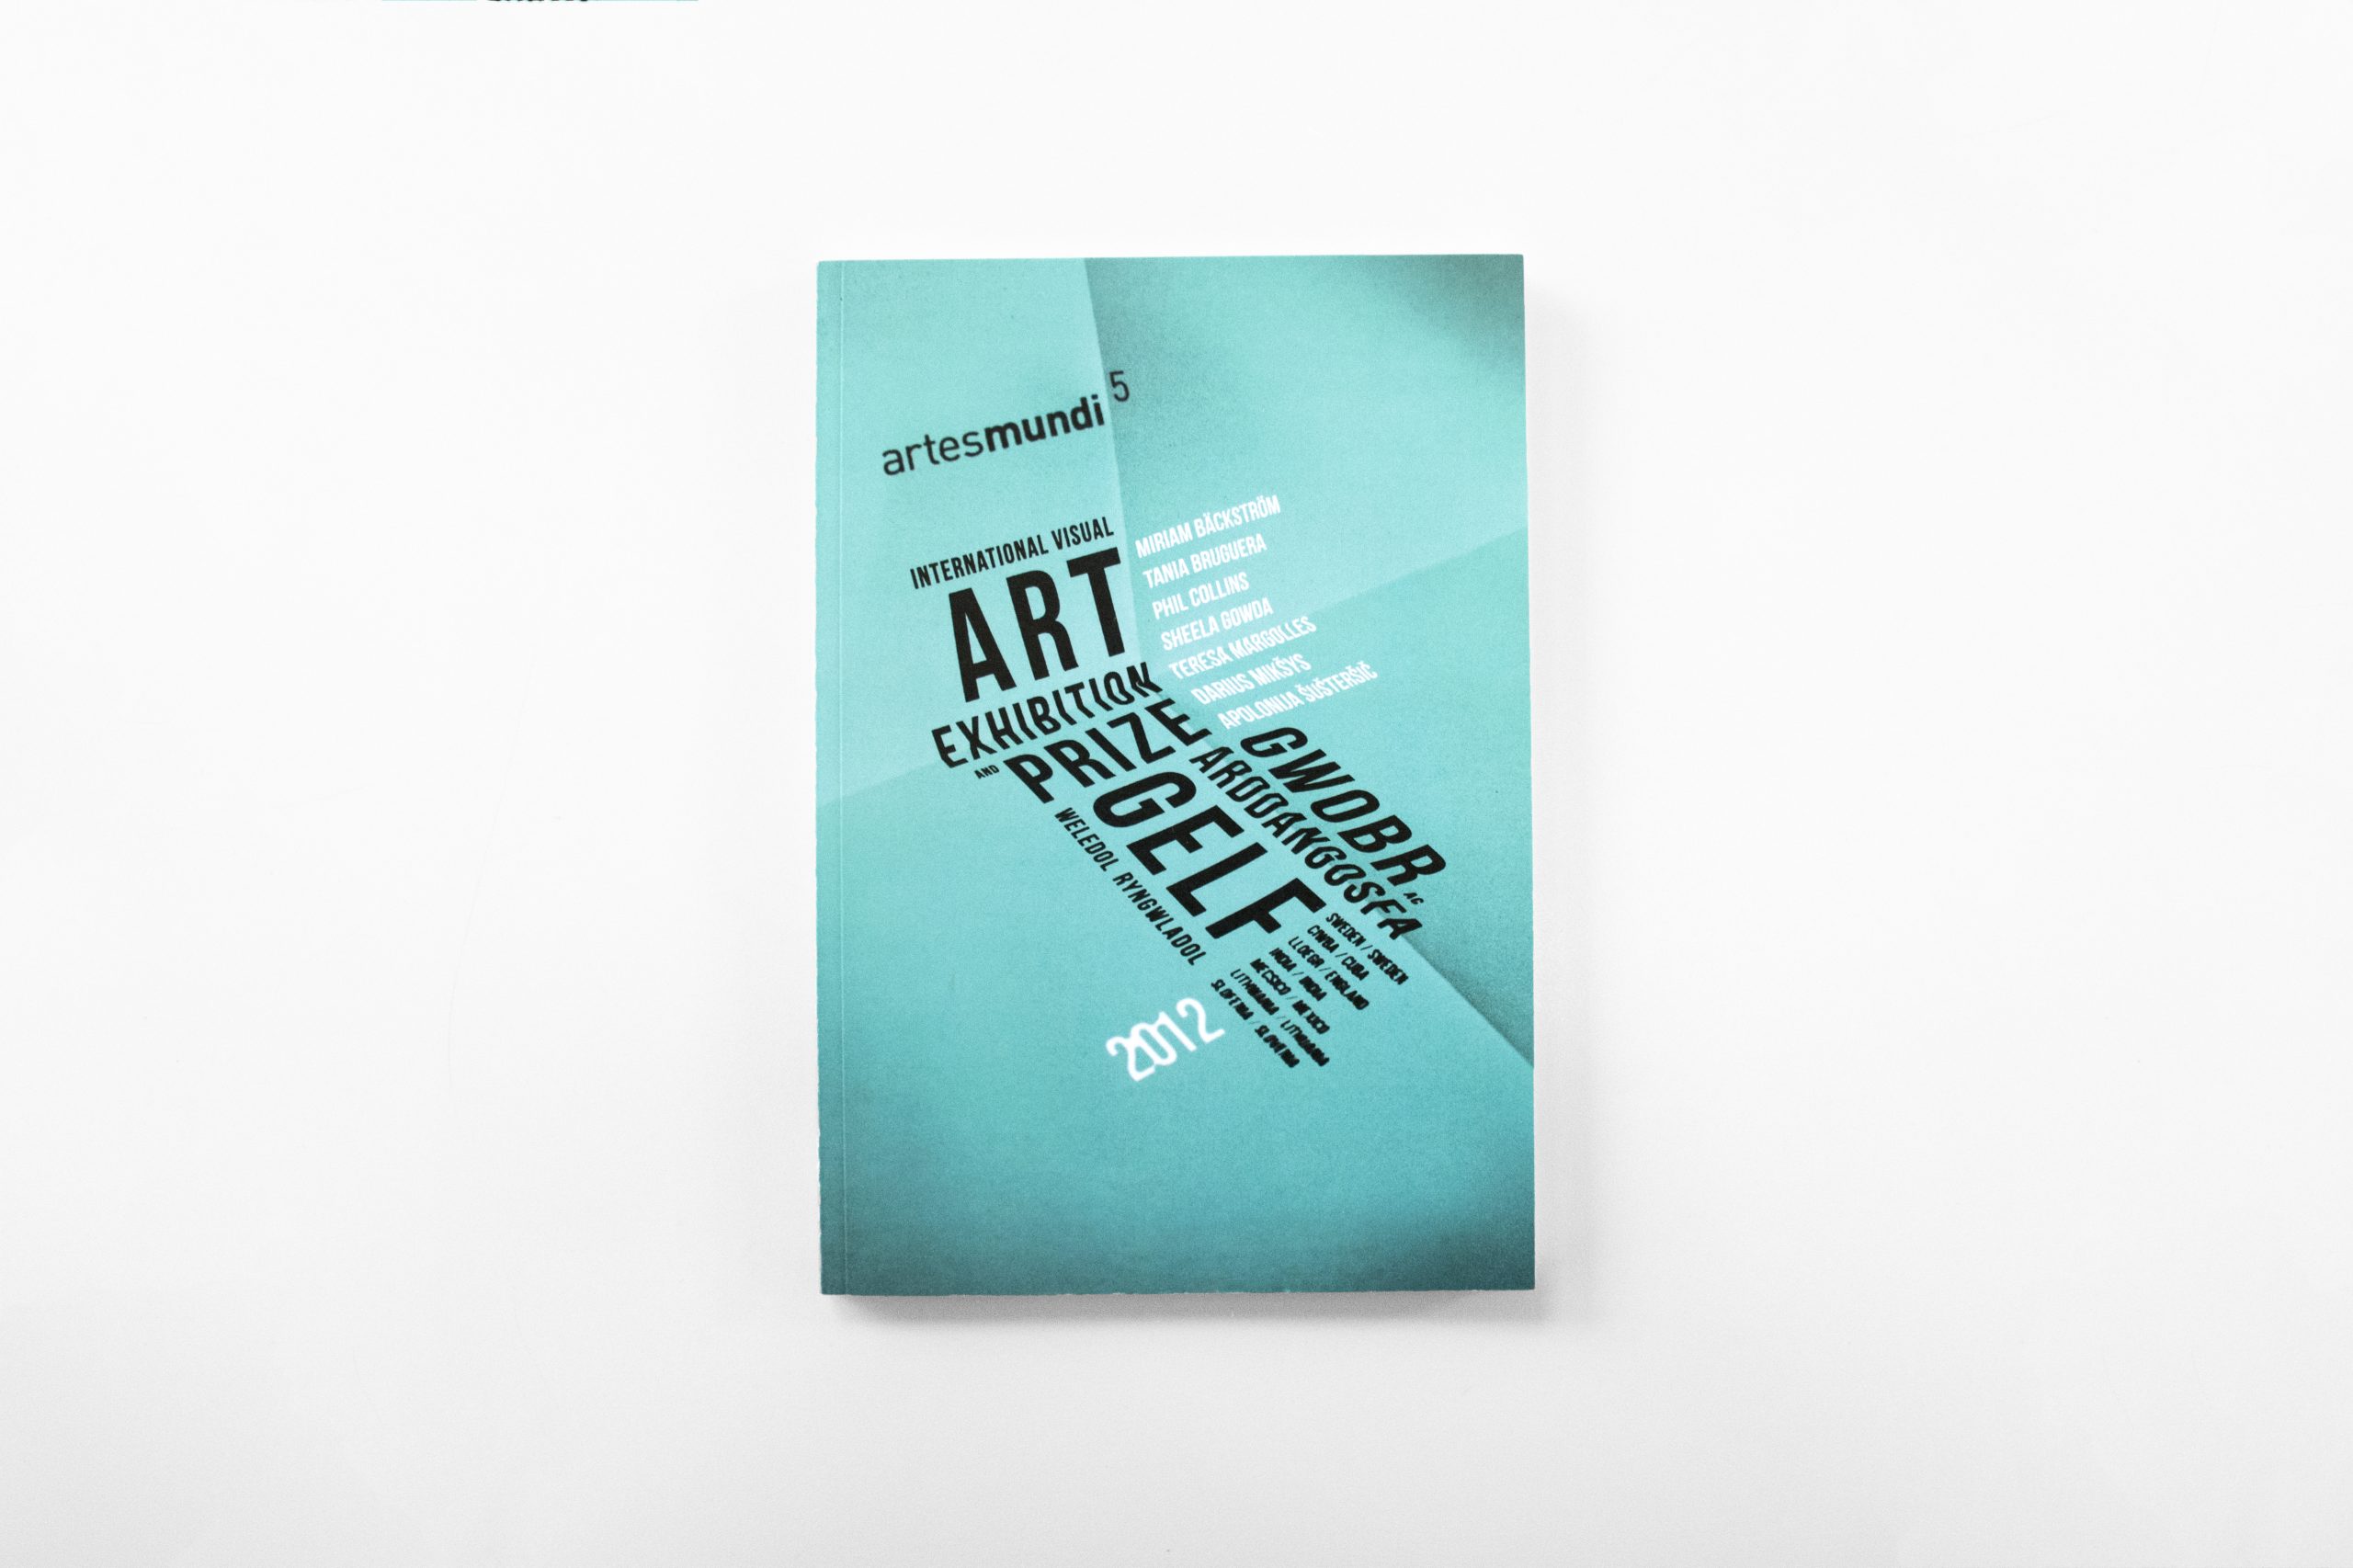 Artes Mundi 5 Catalogue cover, the front is a light teal graphic with black and white text at different angles.